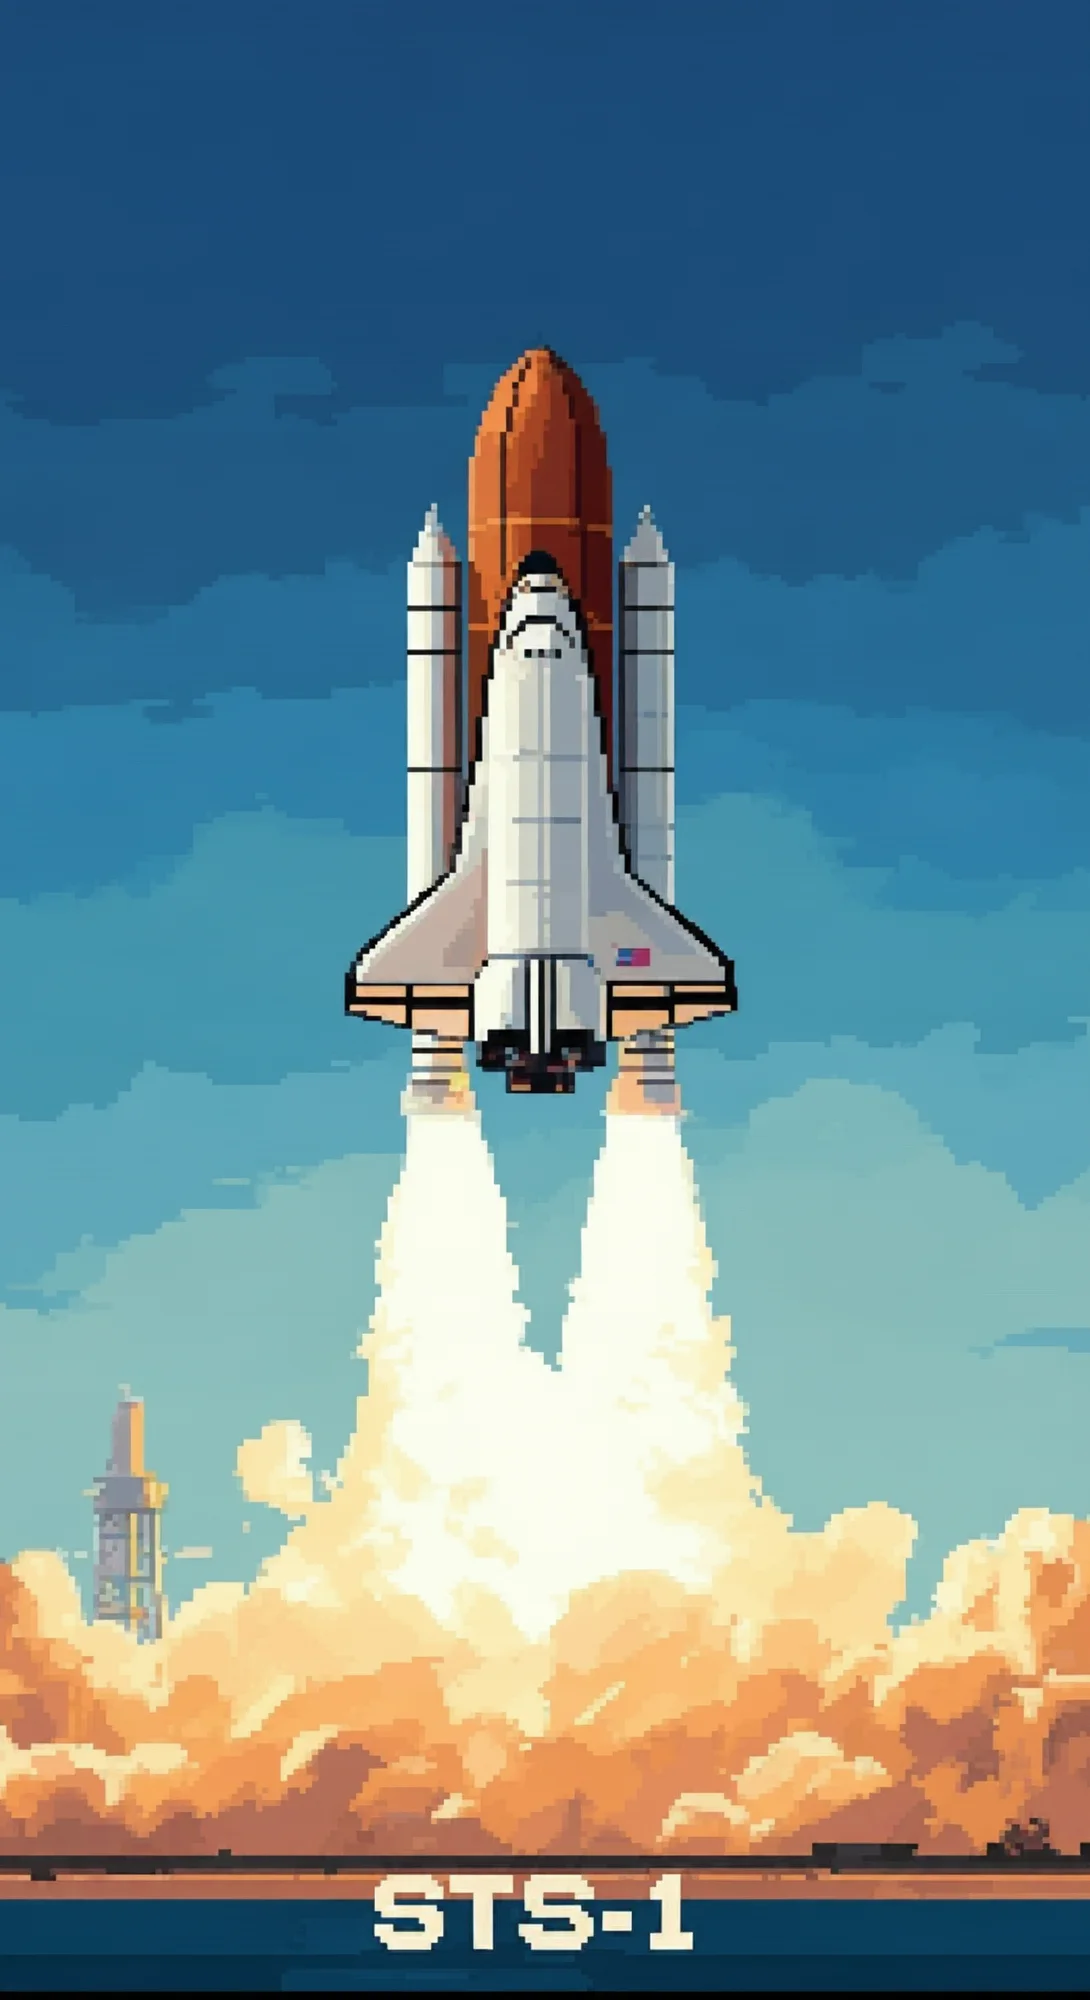 A pixel art illustration of the Space Shuttle STS-1 launching into a blue sky, leaving a trail of smoke and flames. The text "STS-1" is at the bottom of the image.